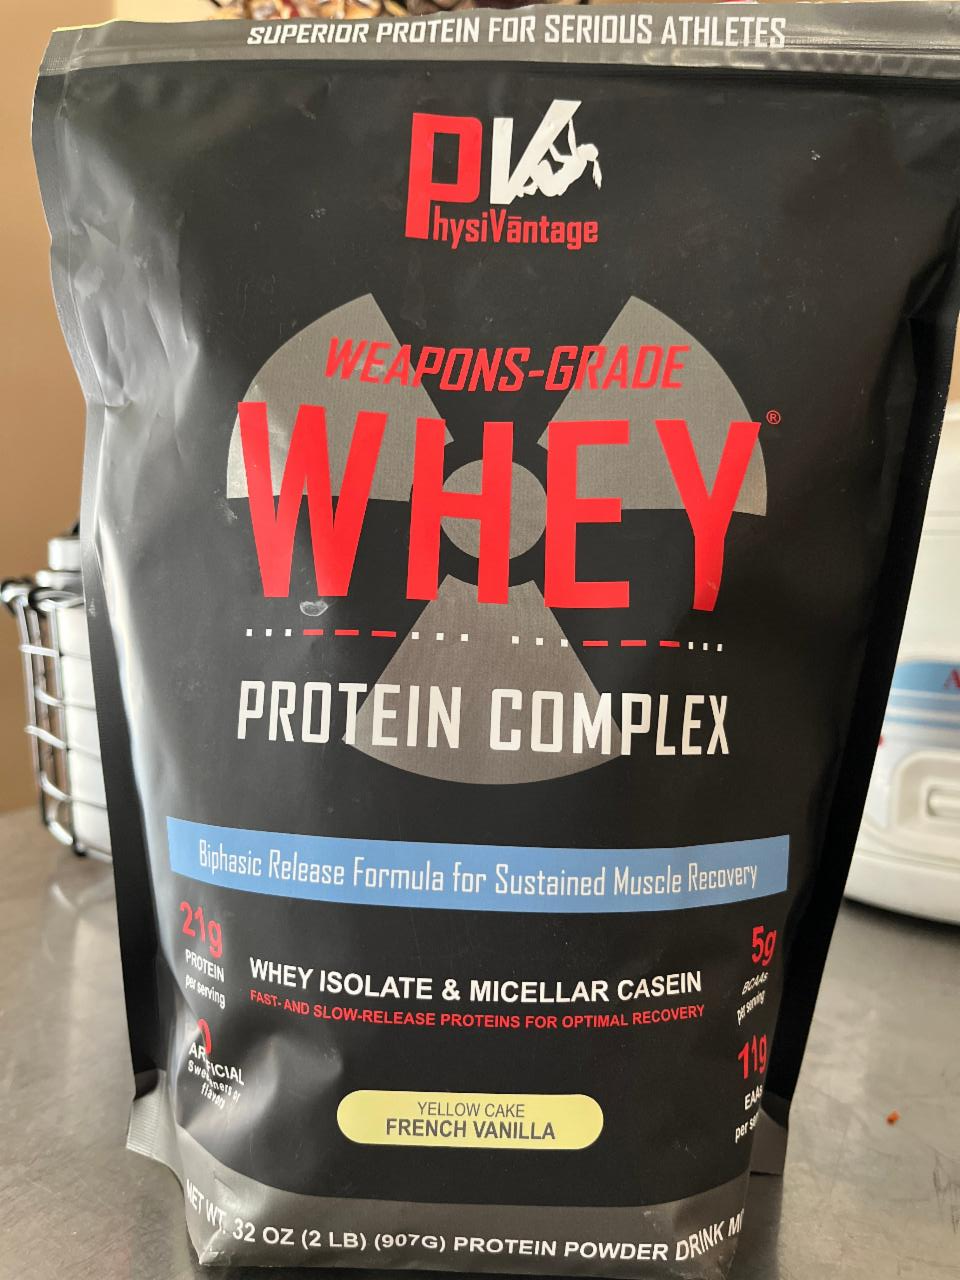 Fotografie - Weapons-Grade Whey Protein Complex Yellow Cake French Vanilla Physi Vantage